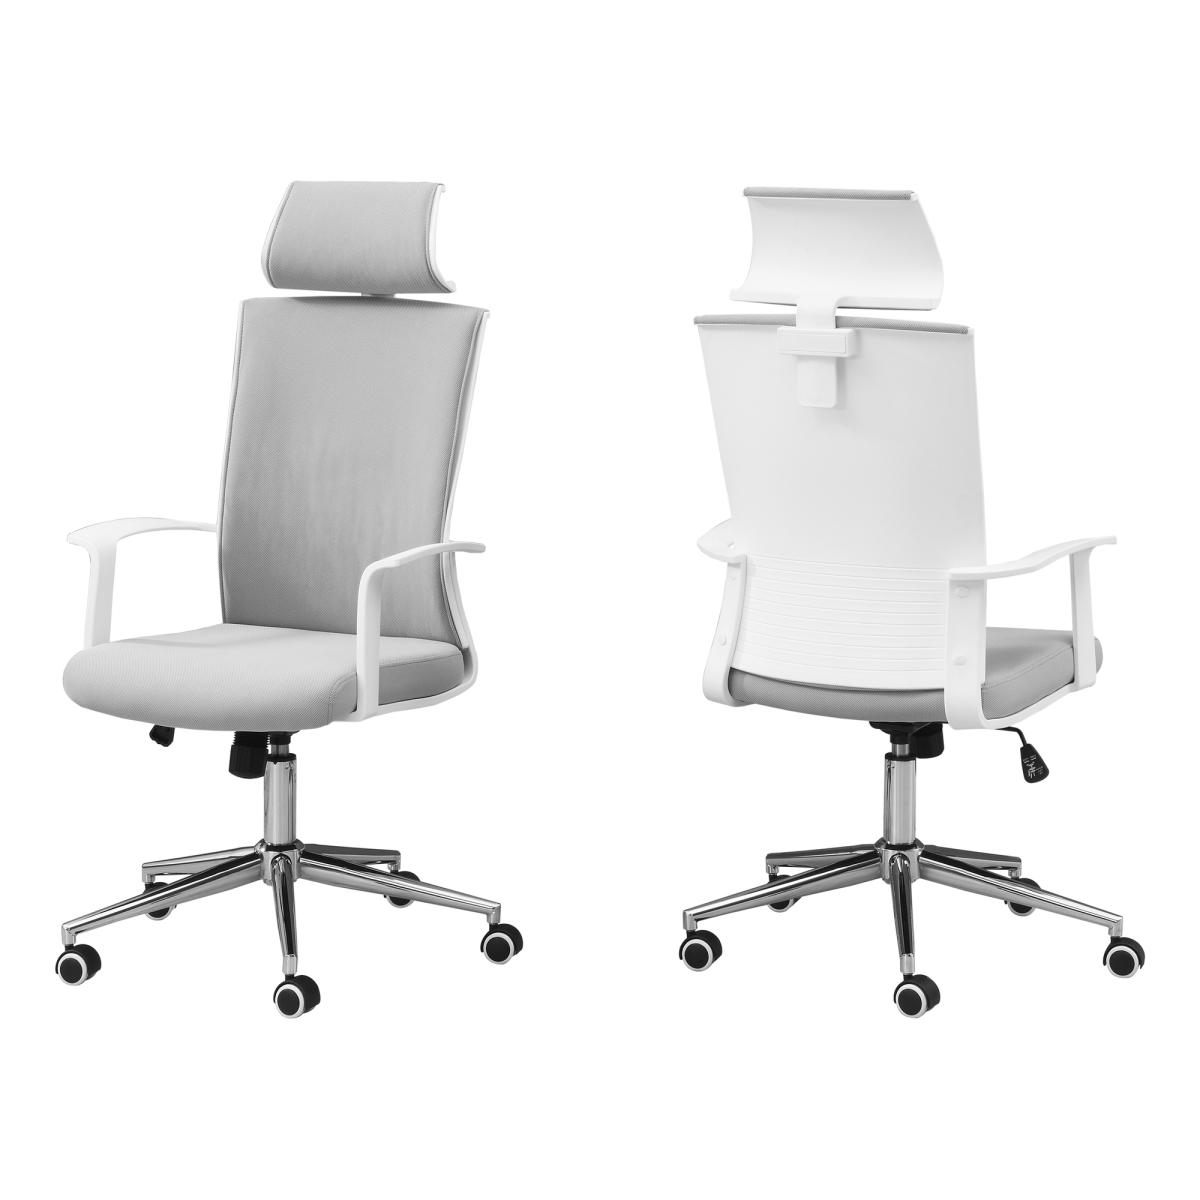 White with Grey Fabric High Back Executive Office Chair -  Gfancy Fixtures, GF3099636